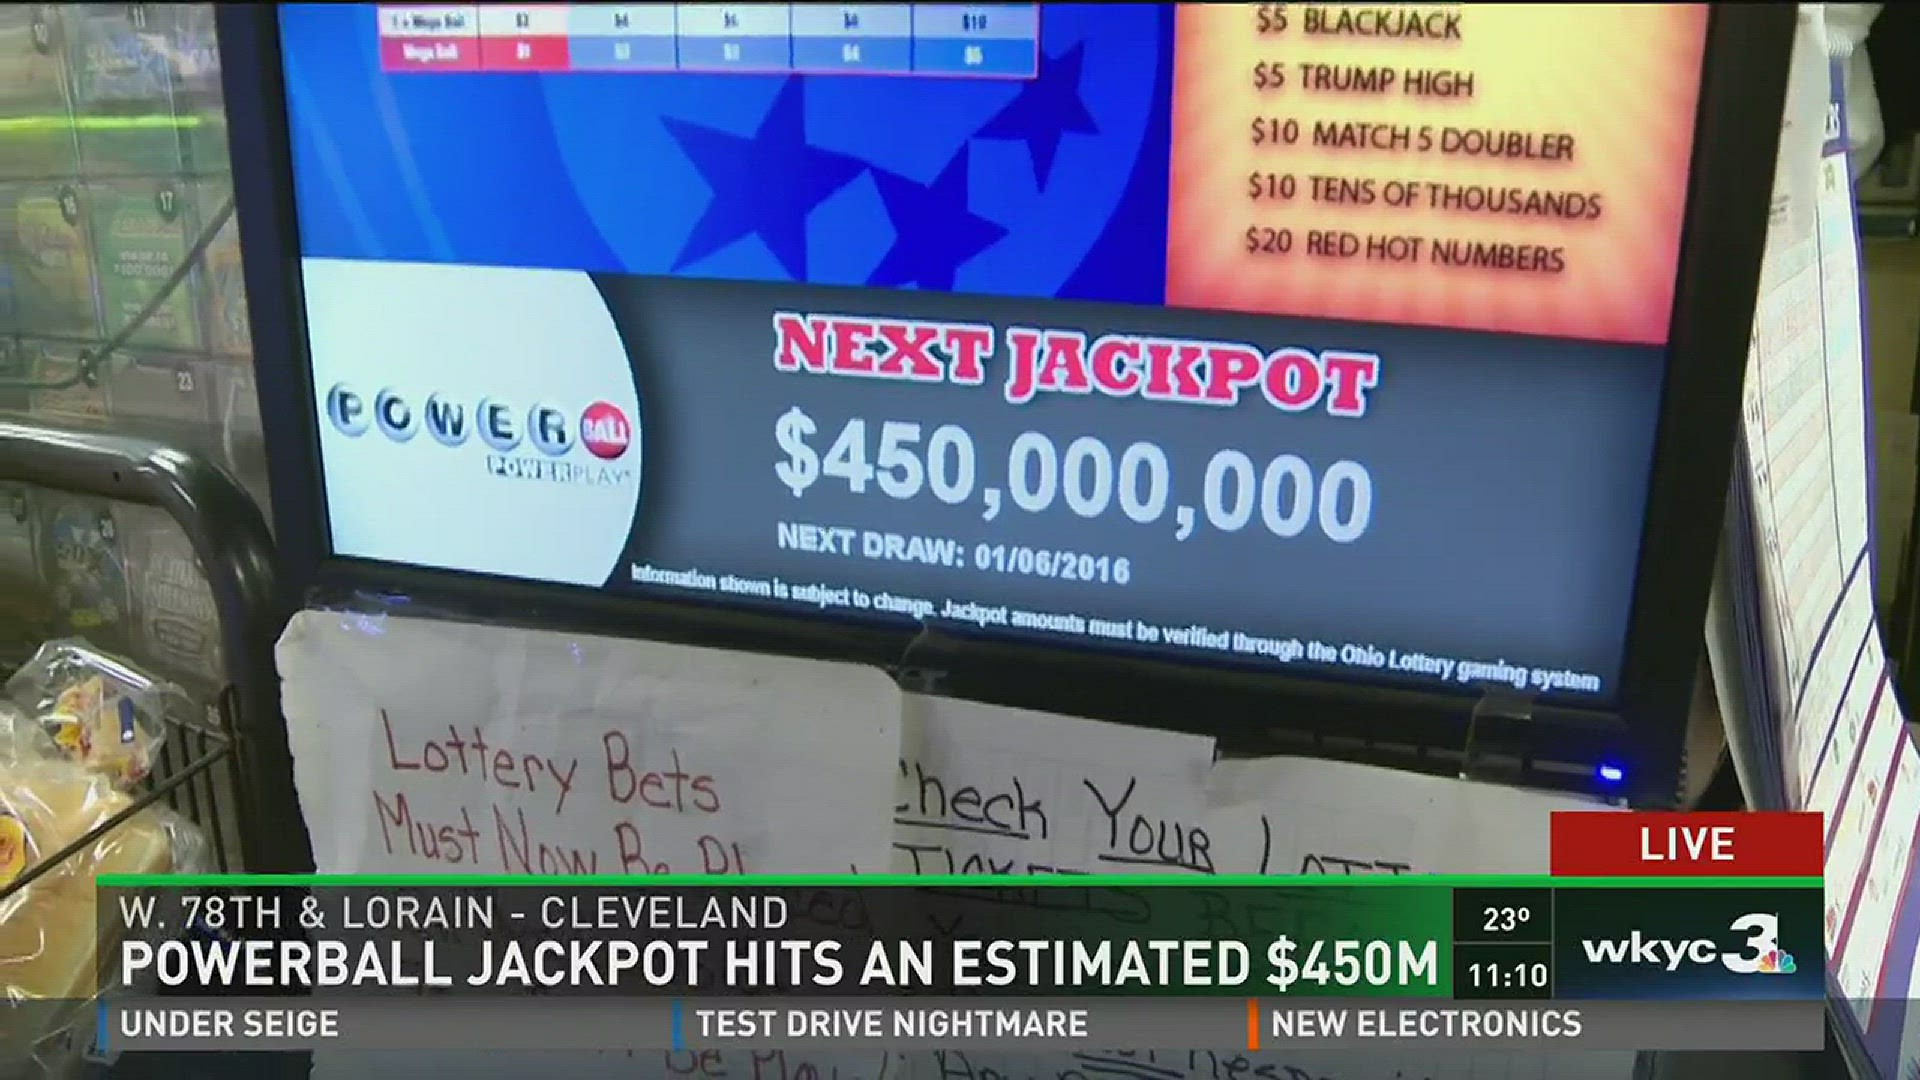 The $450 million dollar jackpot is the 6th largest in North American history.